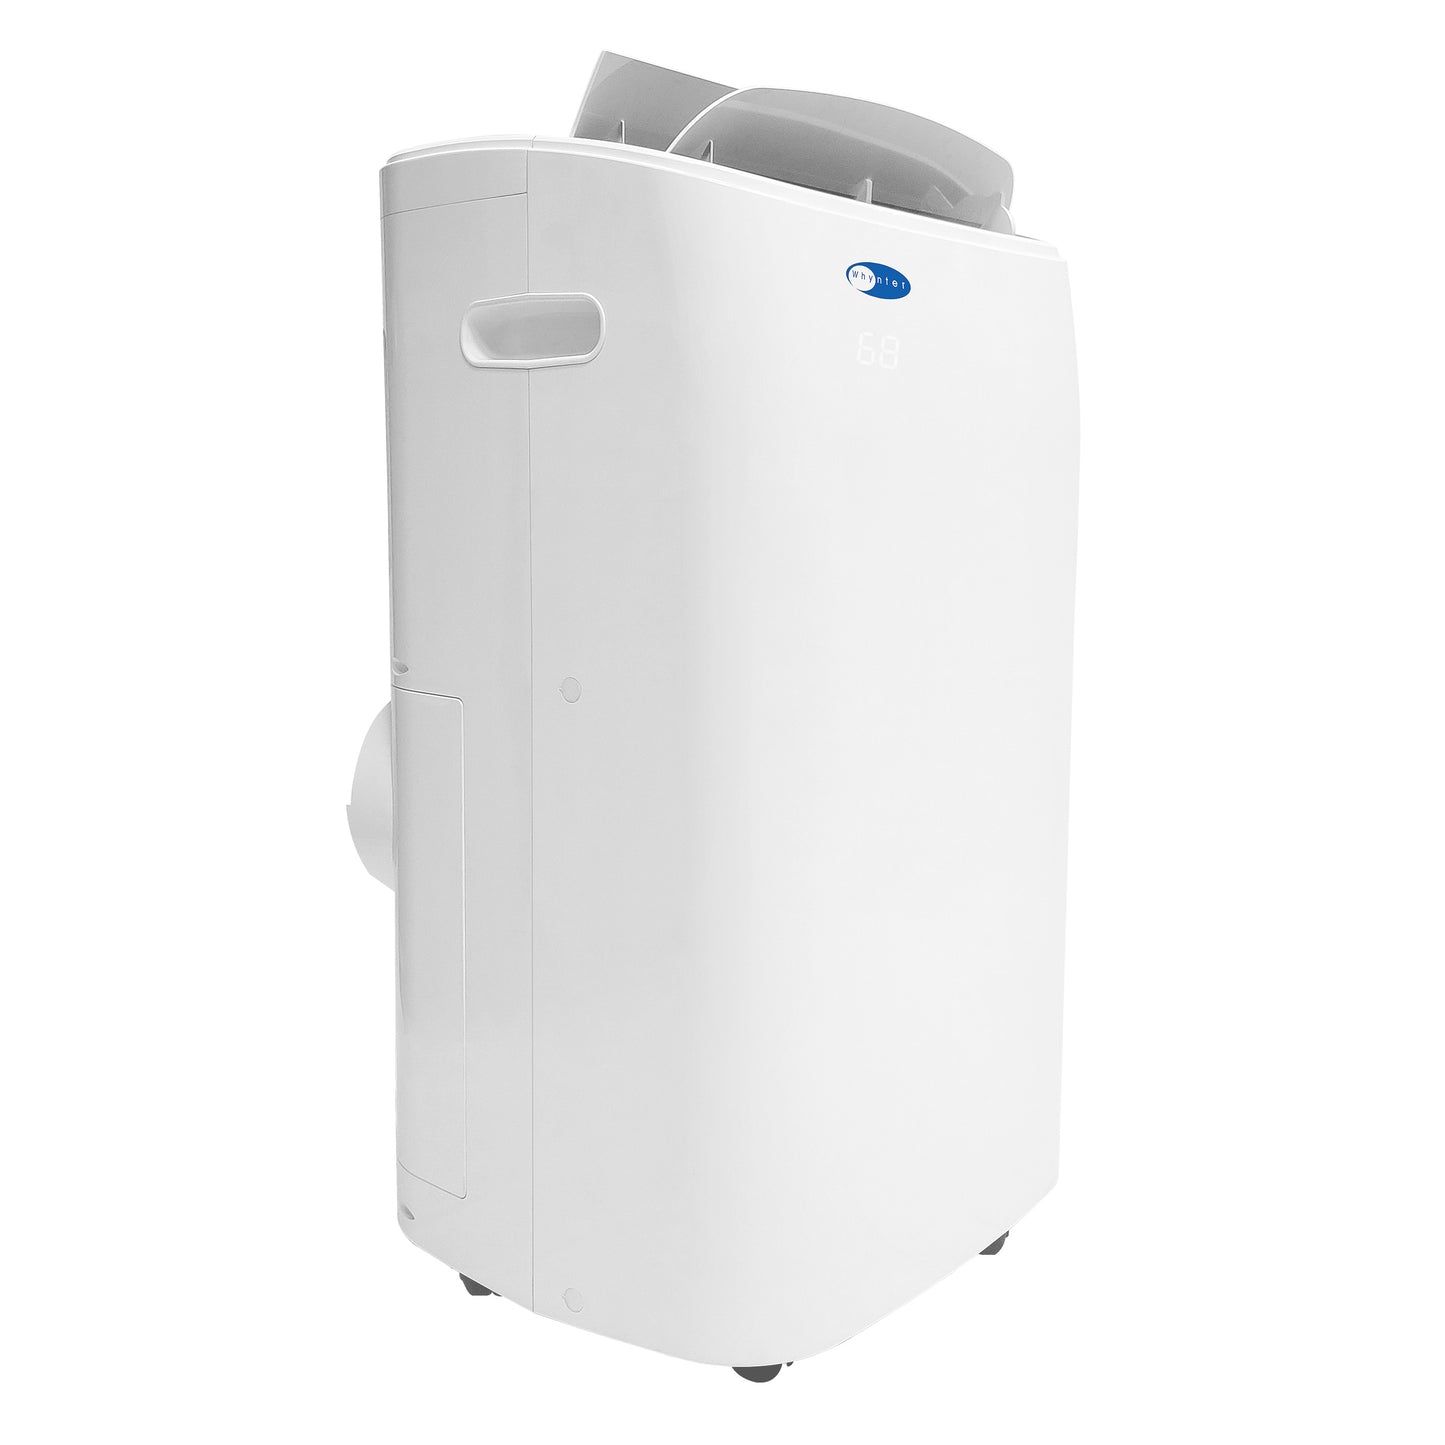 Buy a Whynter 14,000 BTU 500 sq ft Dual Hose Portable Air Conditioner with HEPA and Carbon Filter by Chilled Beverages